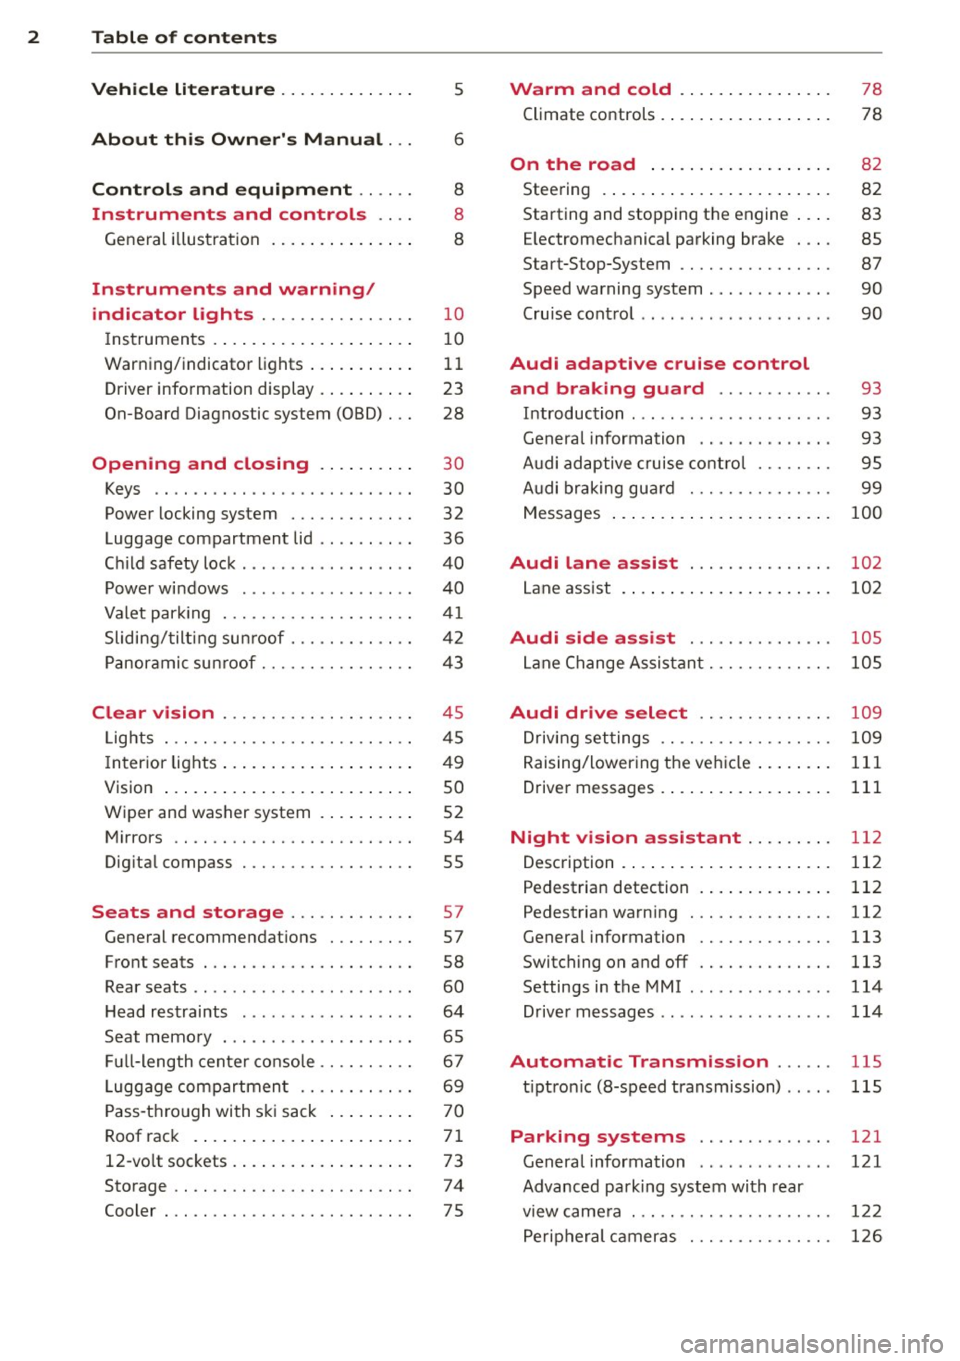 AUDI S8 2013  Owners Manual 2  Table  of  contents Vehicle  literature  .. .. .. .. .. ... . 
5 
About  this  Owners  Manual . . . 6 
Controls  and equipment  .. ...  . 
Ins truments  and  controls  .. . . 
General  illustratio